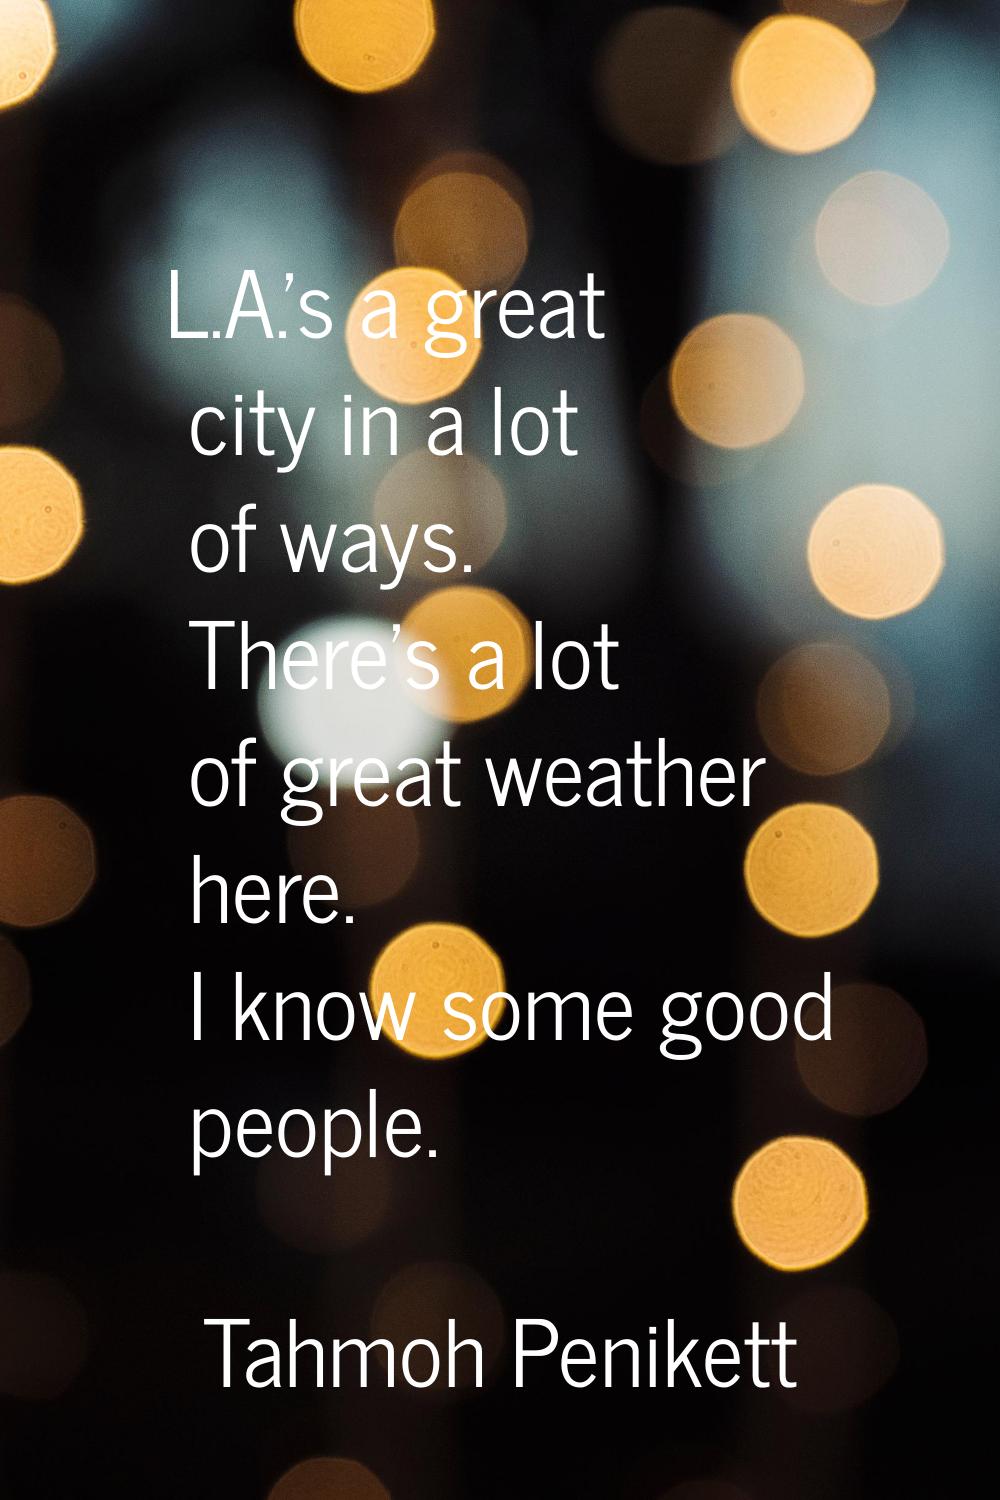 L.A.'s a great city in a lot of ways. There's a lot of great weather here. I know some good people.